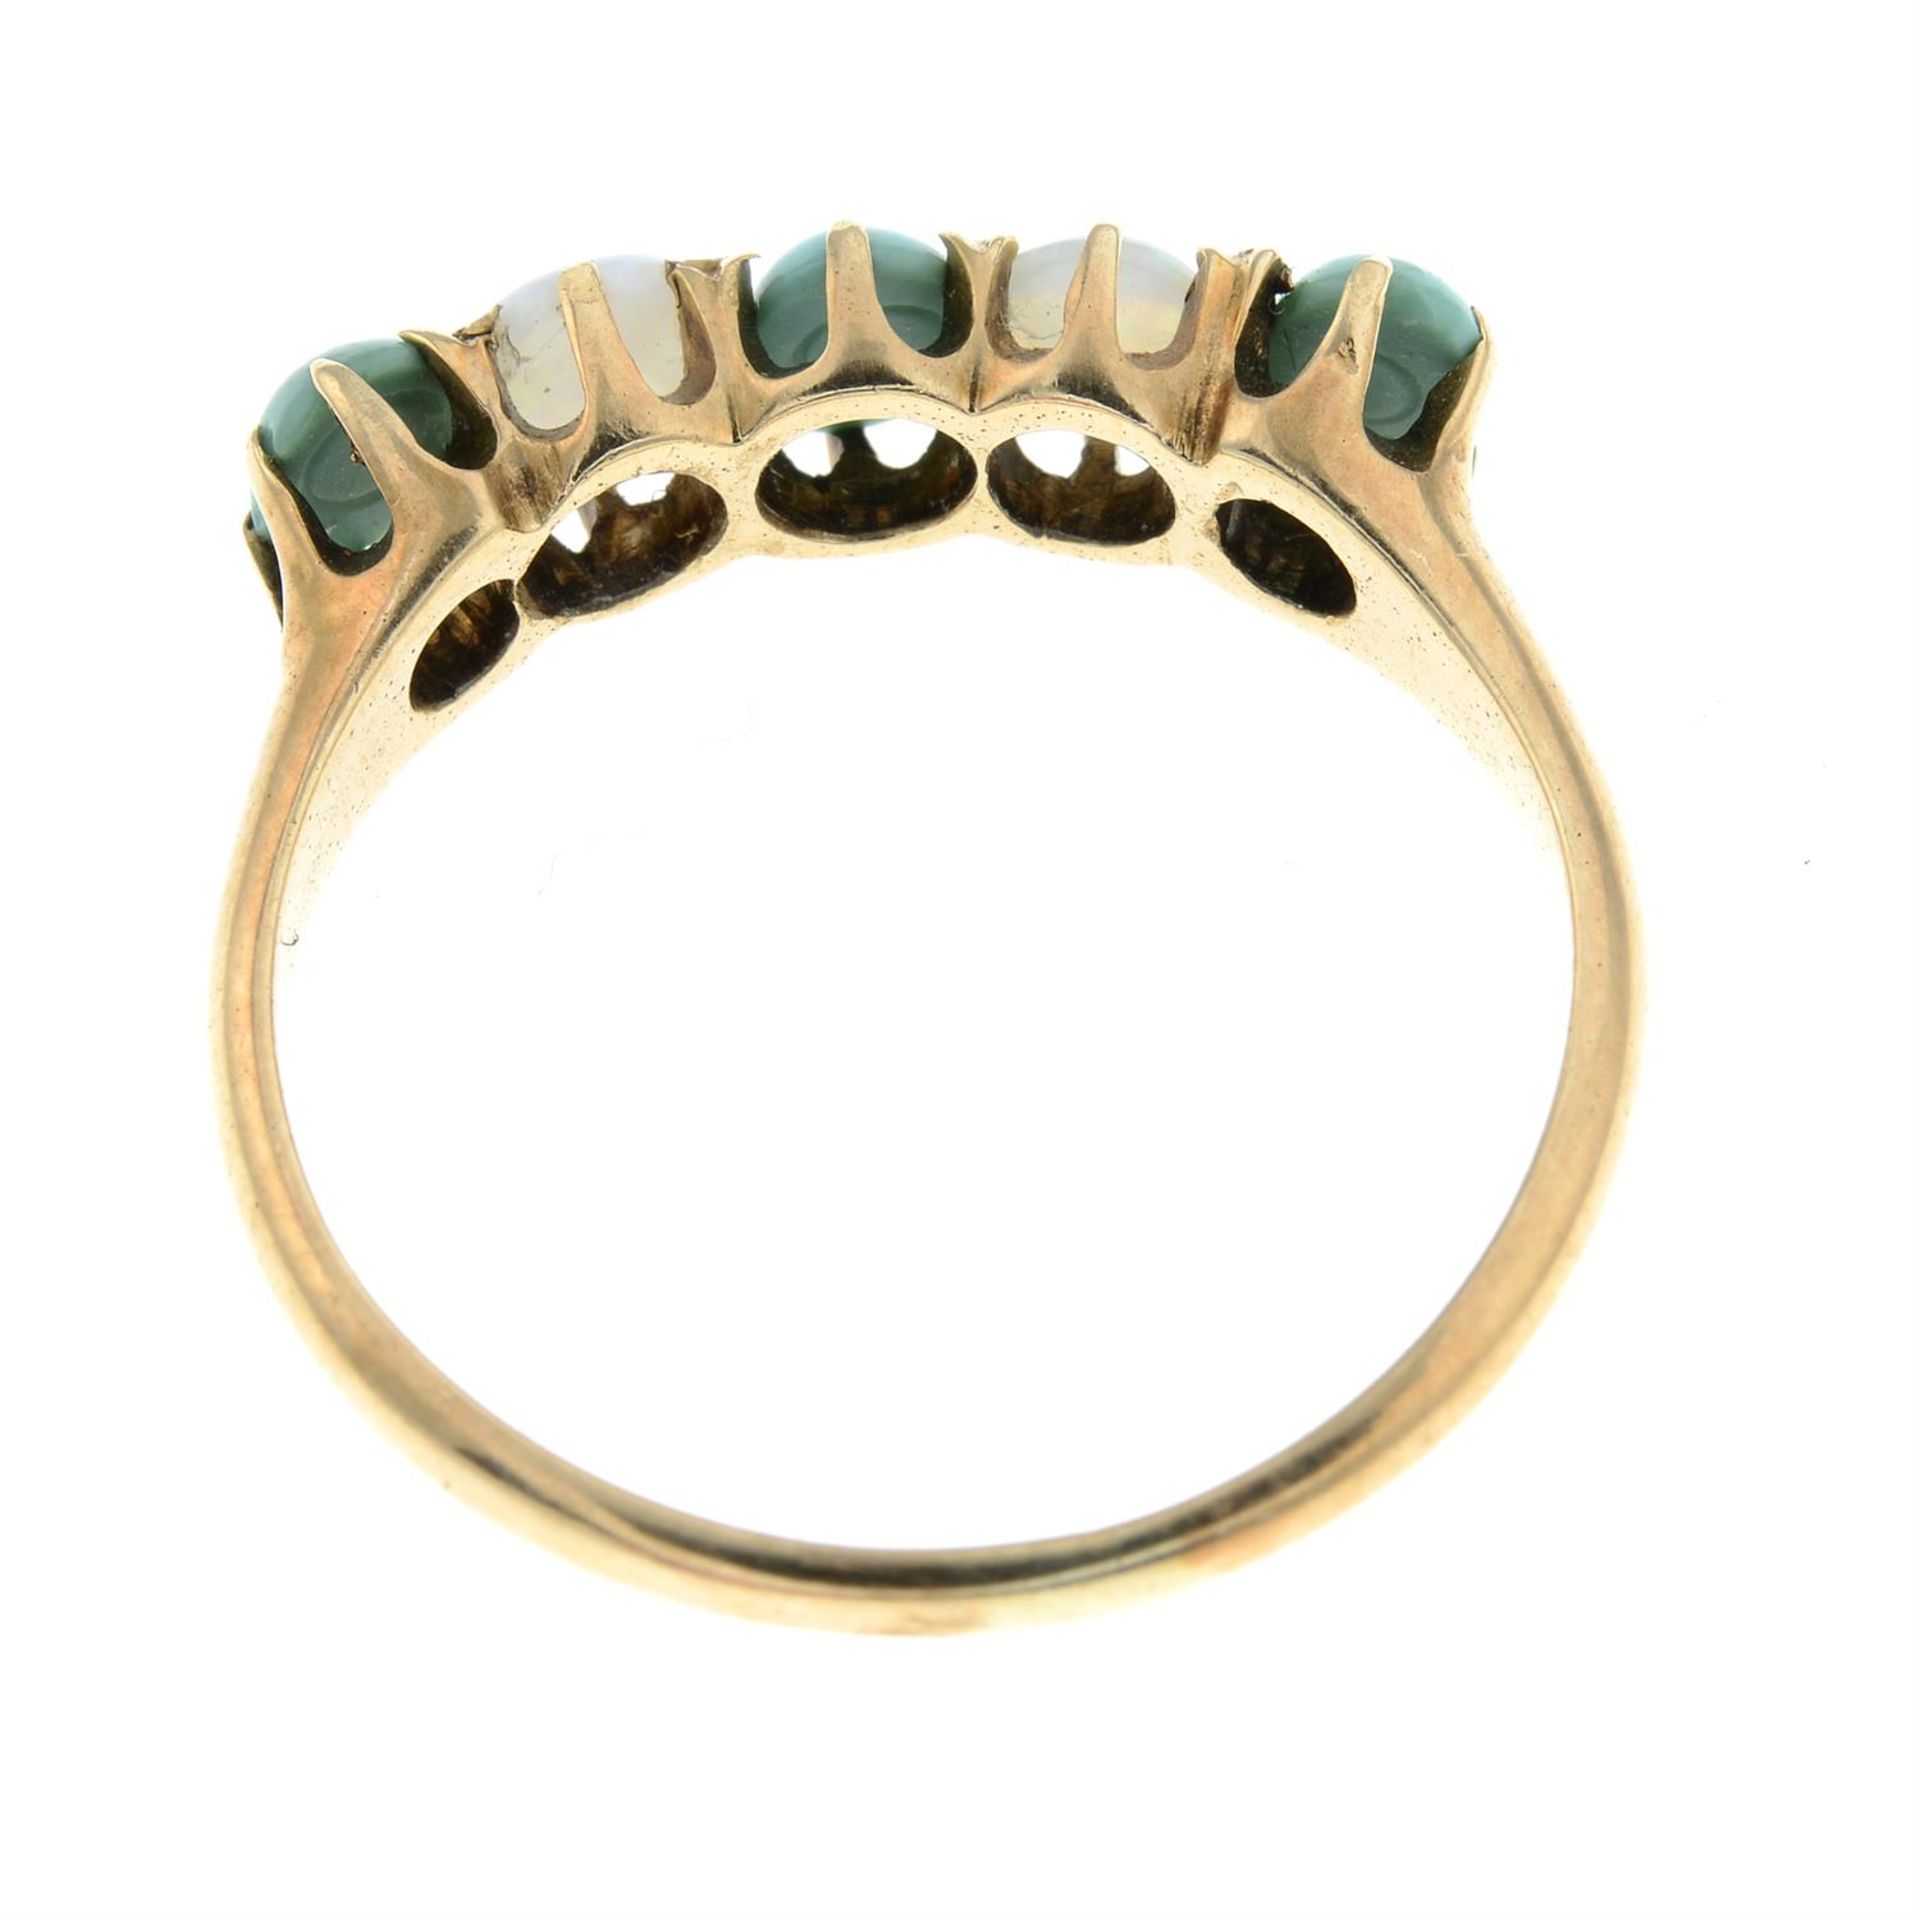 A turquoise and opal five-stone ring. - Image 2 of 2